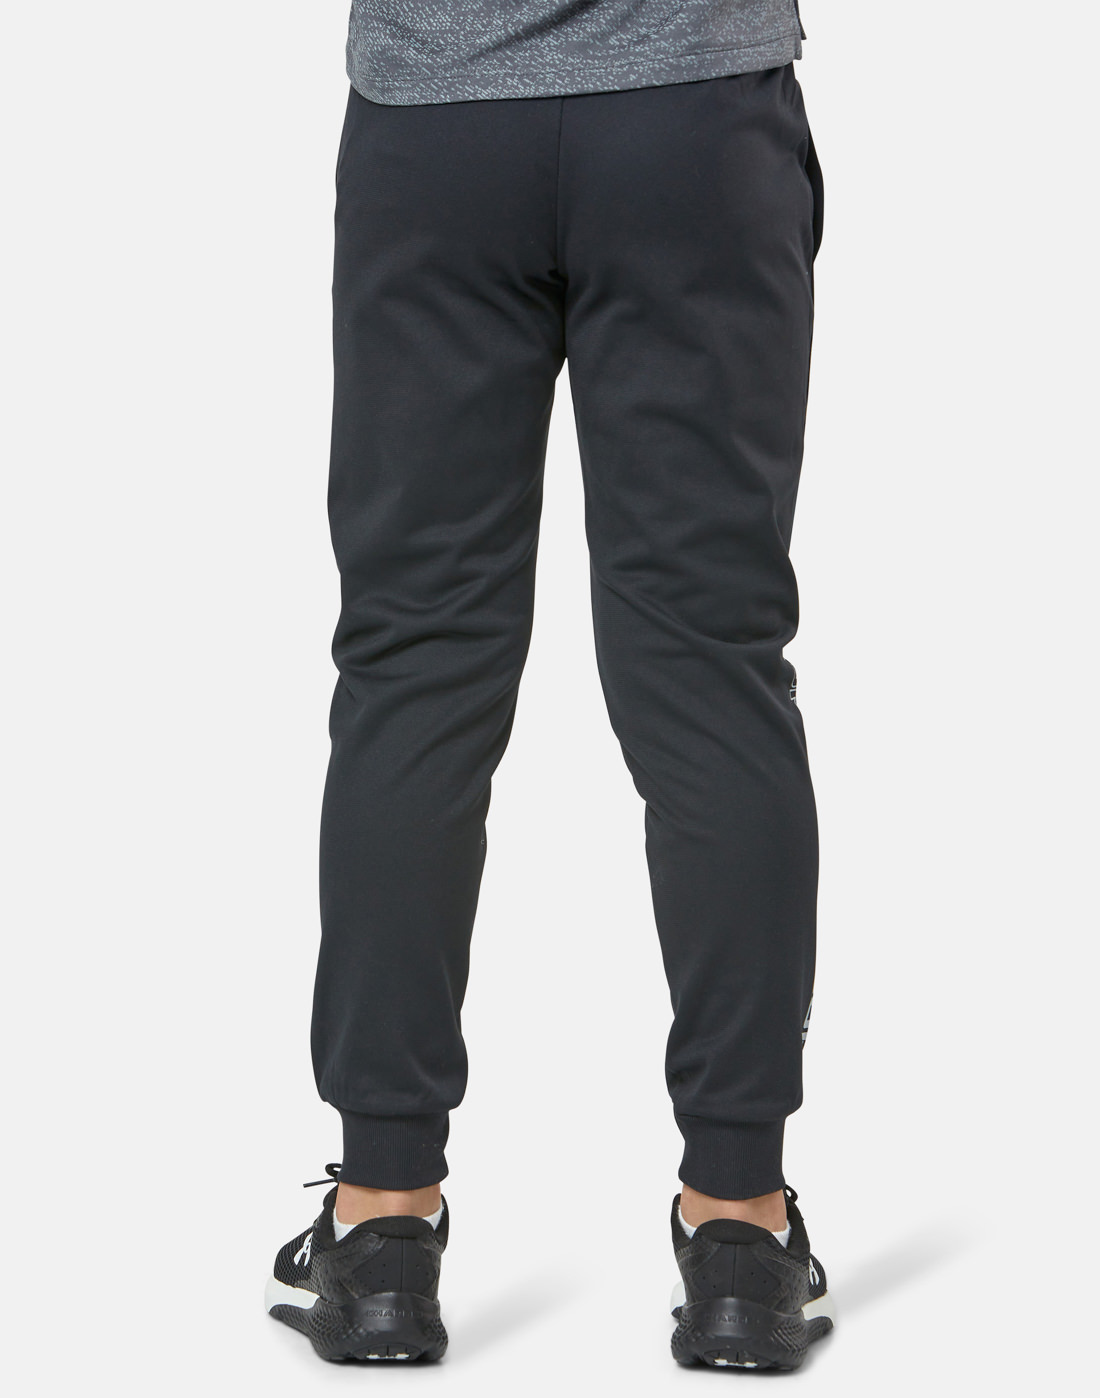 Under Armour Older Boys Brawler 2.0 Tapered Pants - Black | Life Style ...